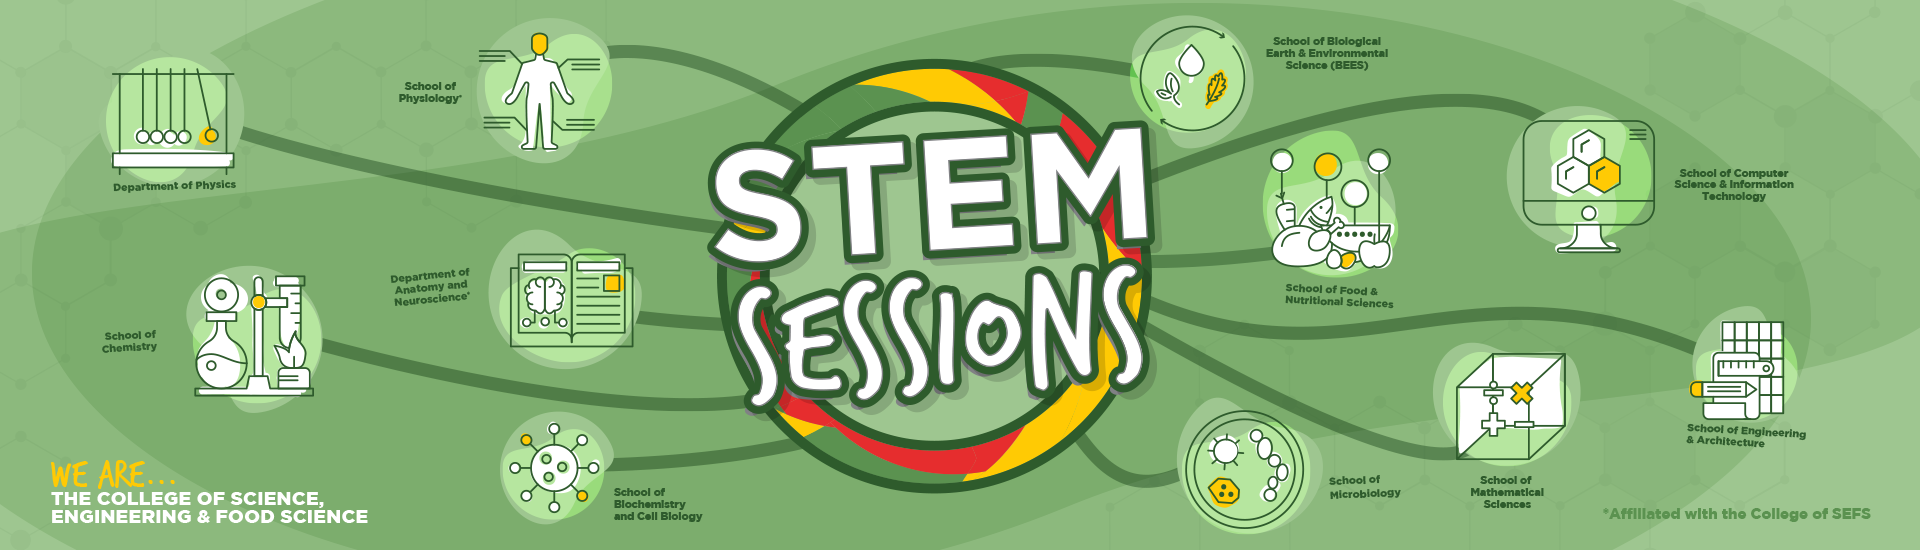 STEM Sessions for CAO Applicants